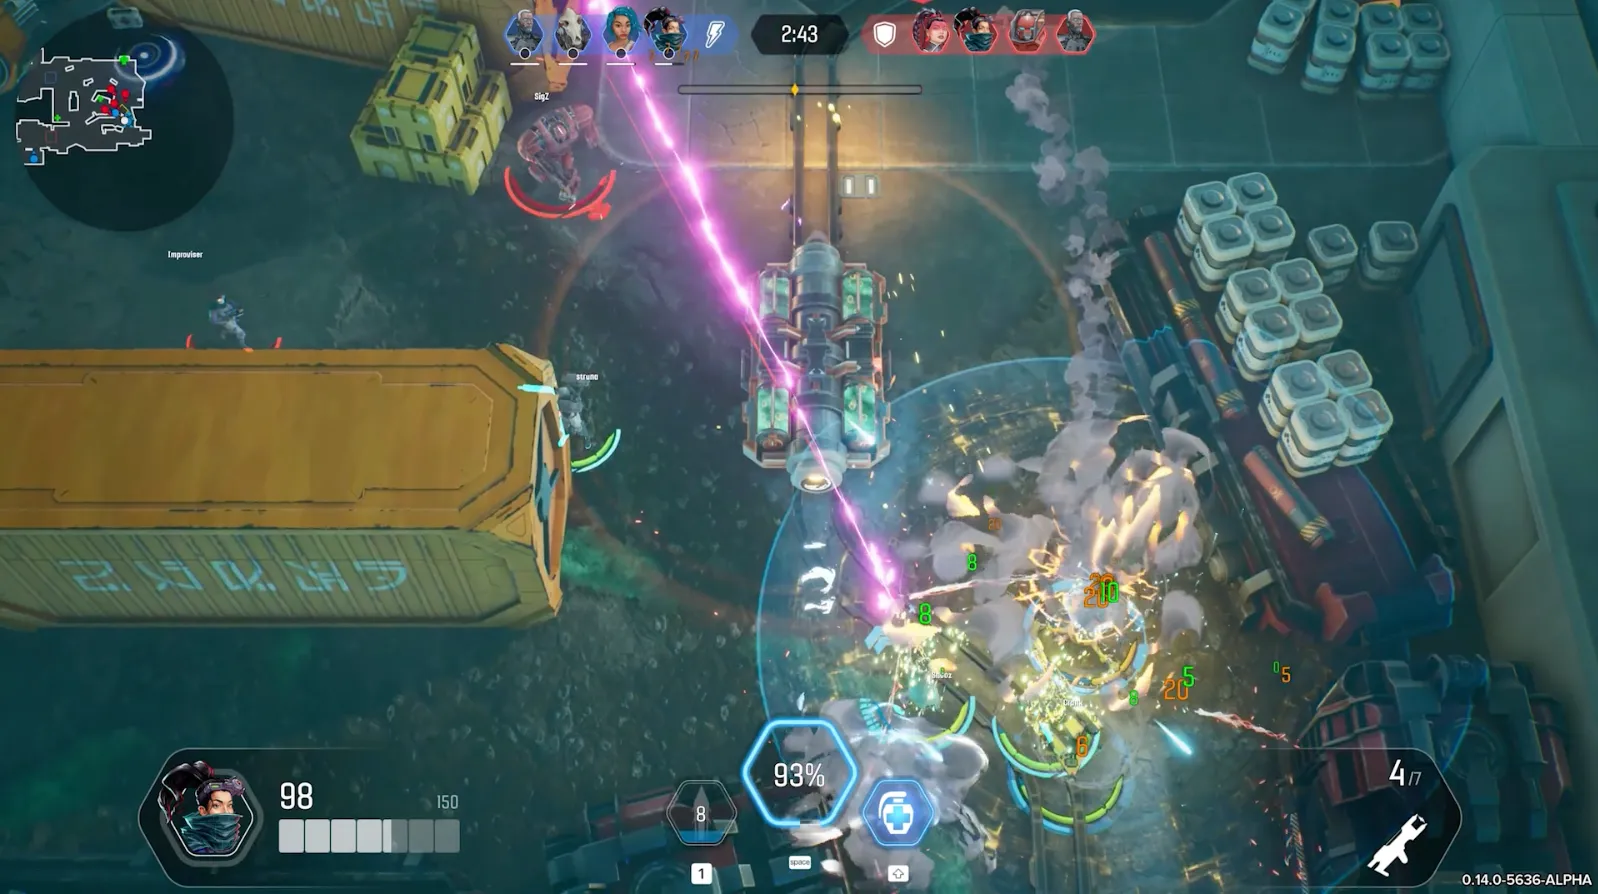 A still from in-game footage of Machines Arena, showing a top-down view of a 4v4 shooter game where heroes have weapons and shoot beams of magical light at each other.